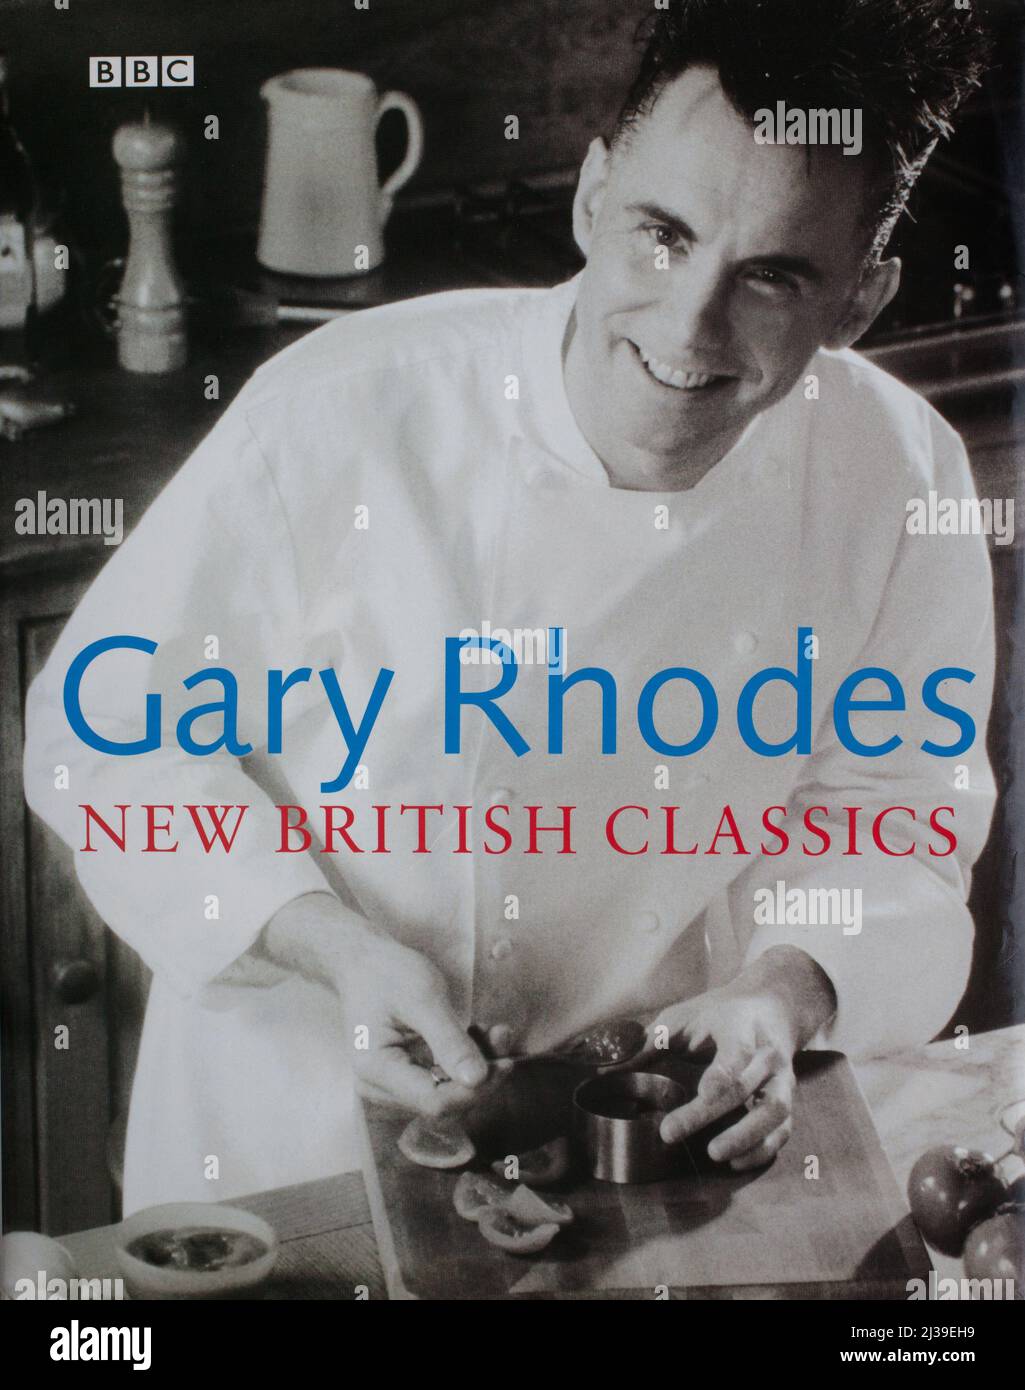 The book, New British Classics by Gary Rhodes Stock Photo